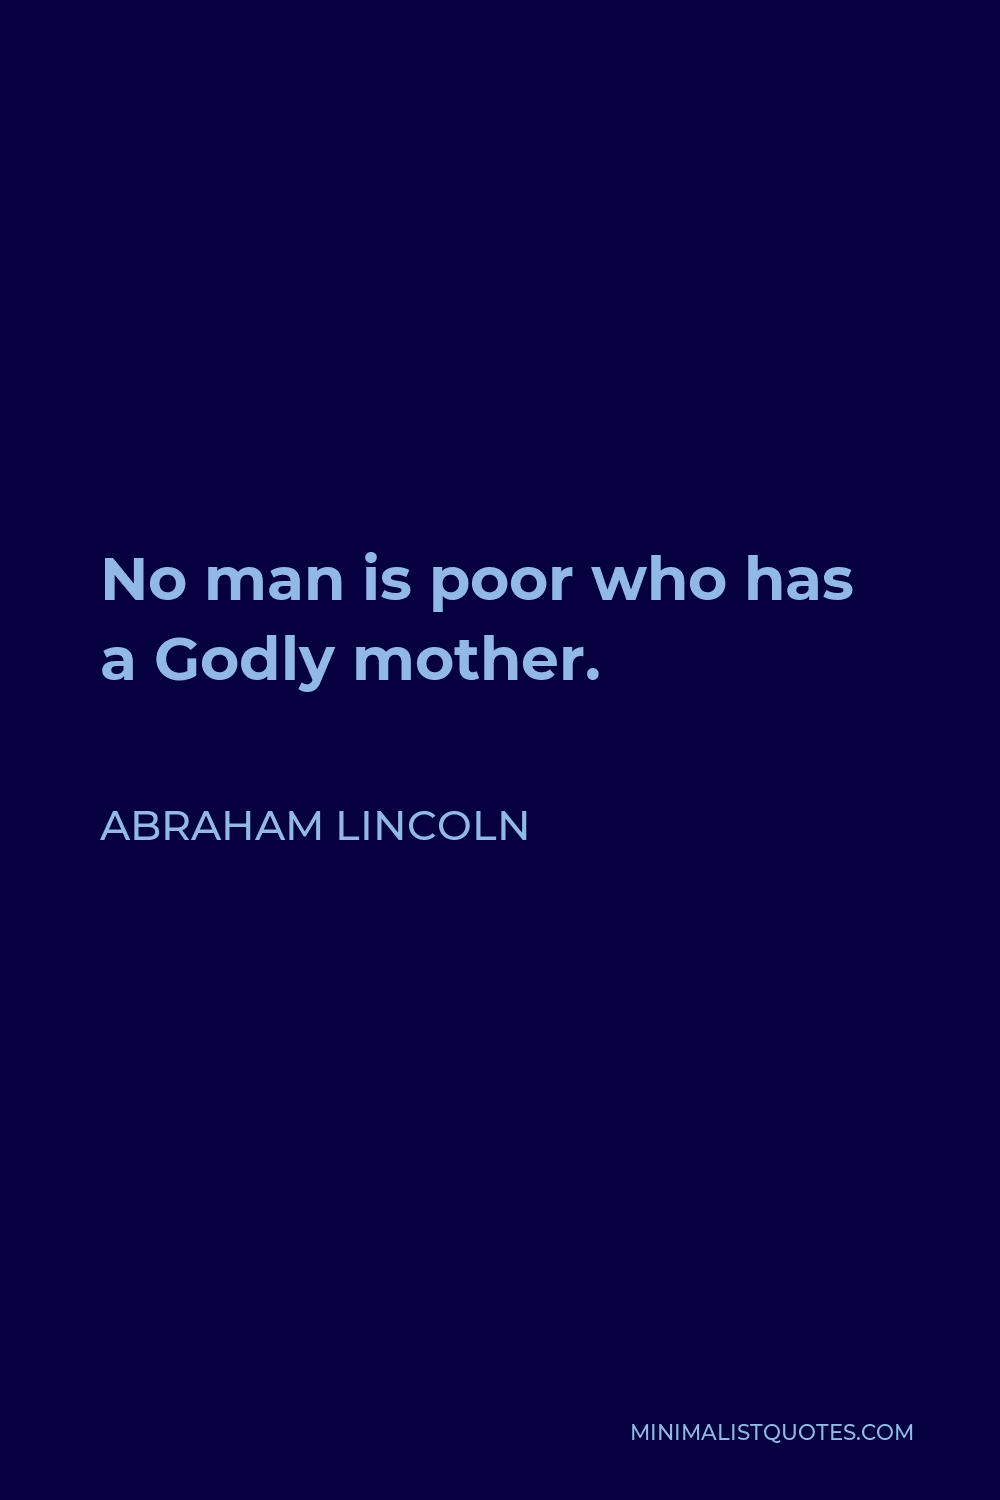 Abraham Lincoln Quote - No man is poor who has a Godly mother.